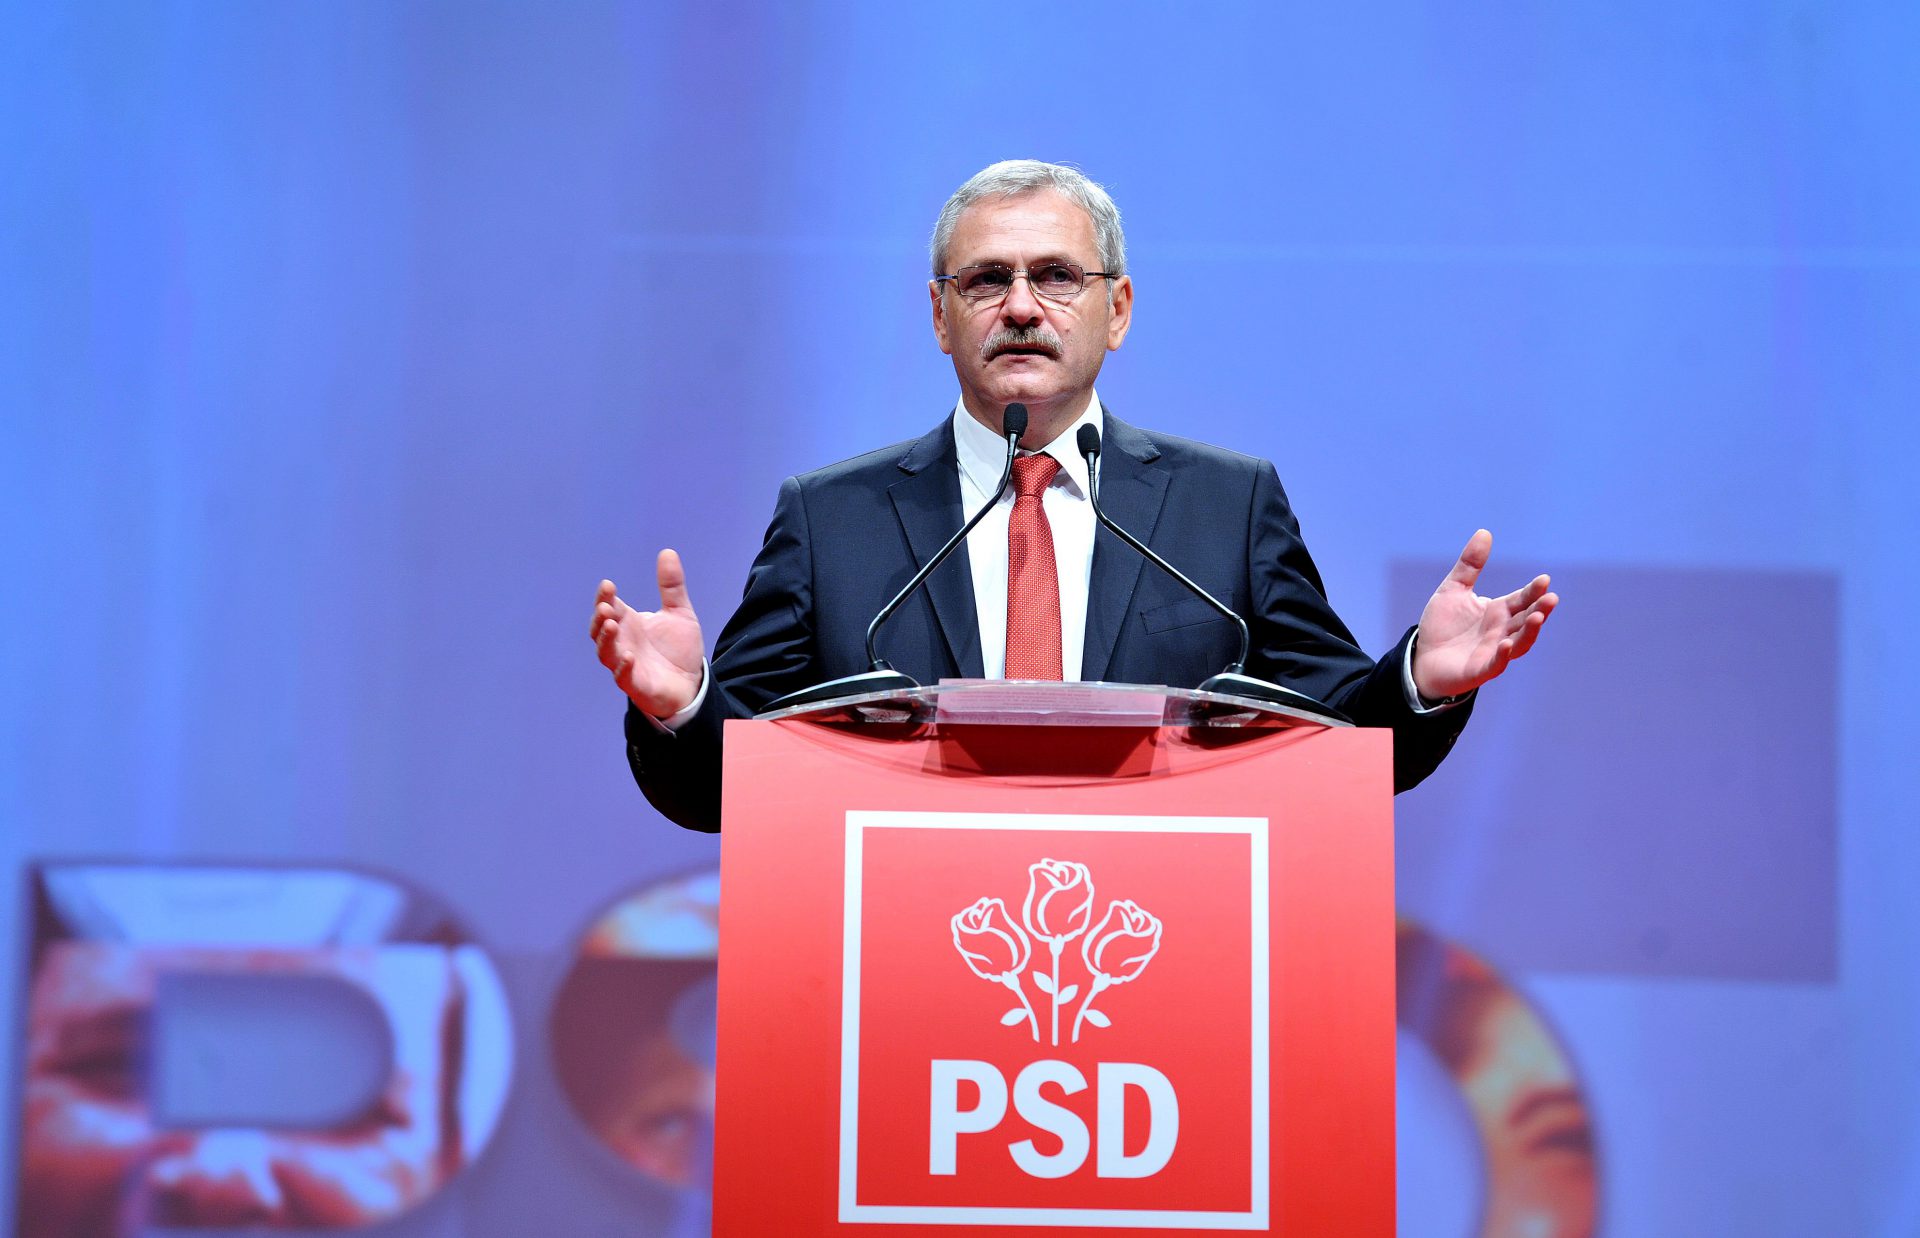 Romania S Ruling Party To Decide On The Future Of Controversial Leader Liviu Dragnea Foreign Brief